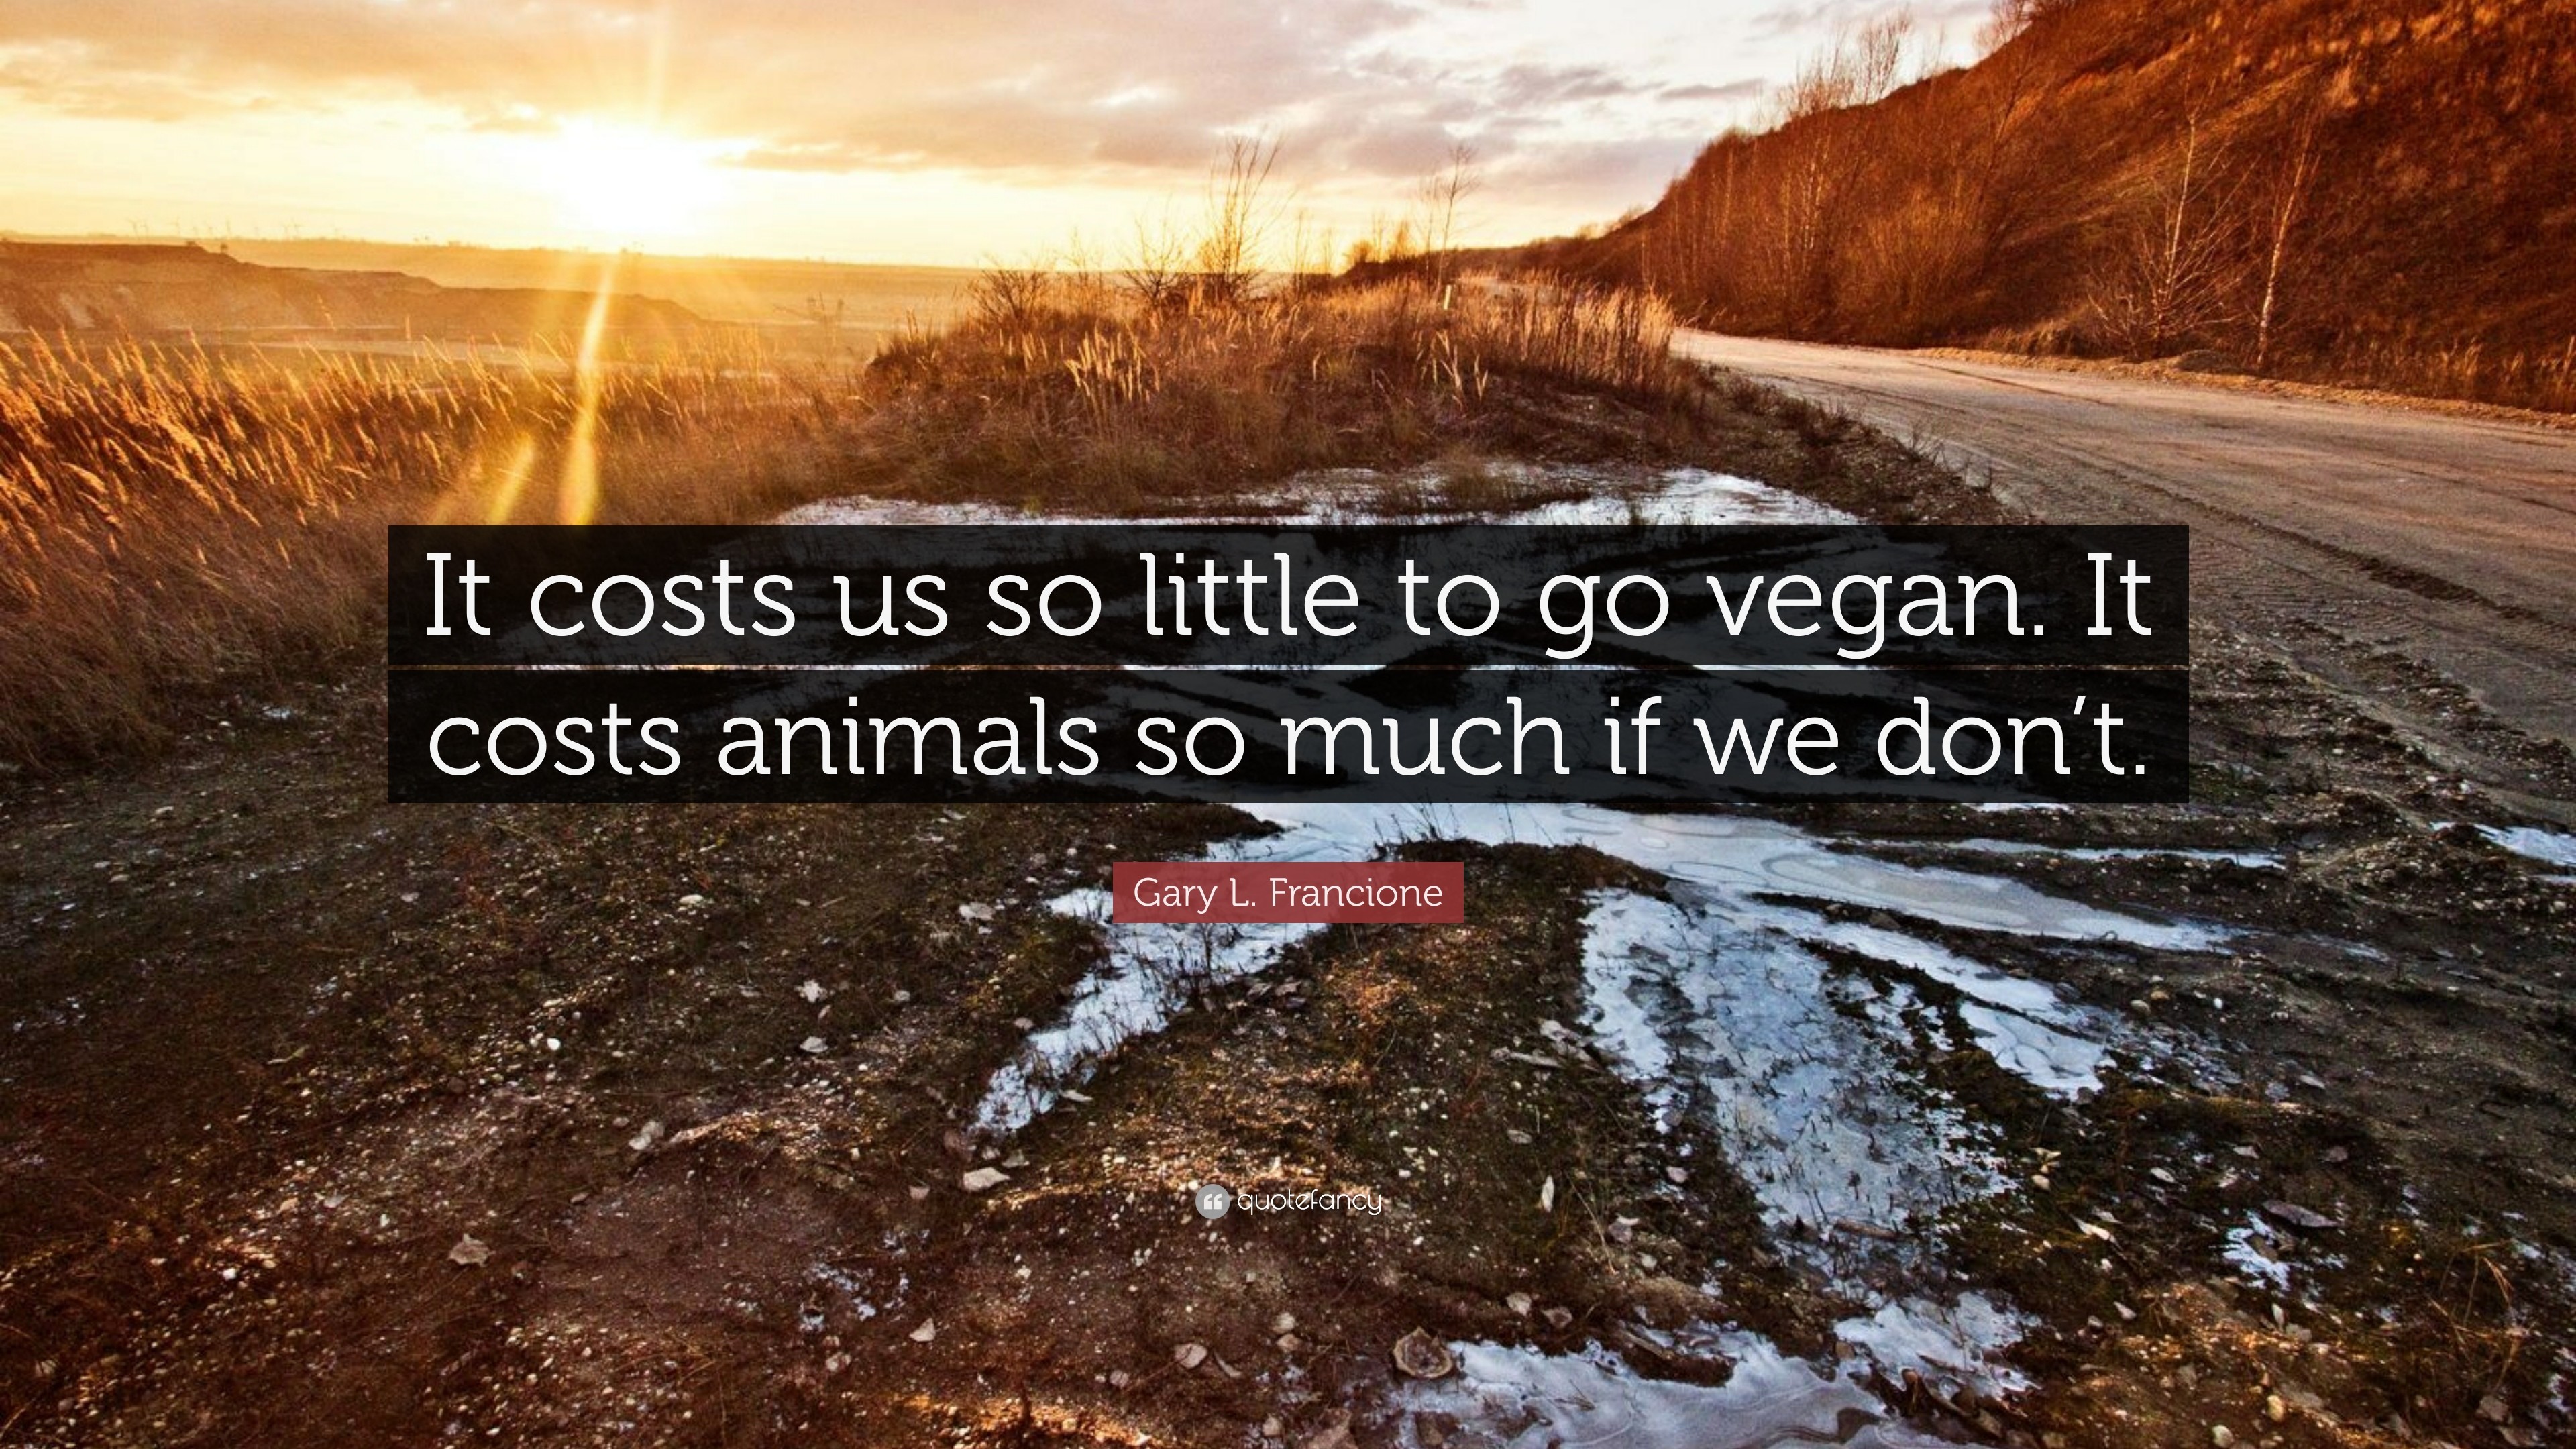 3840x2160 Gary L. Francione Quote: “It costs us so little to go vegan.